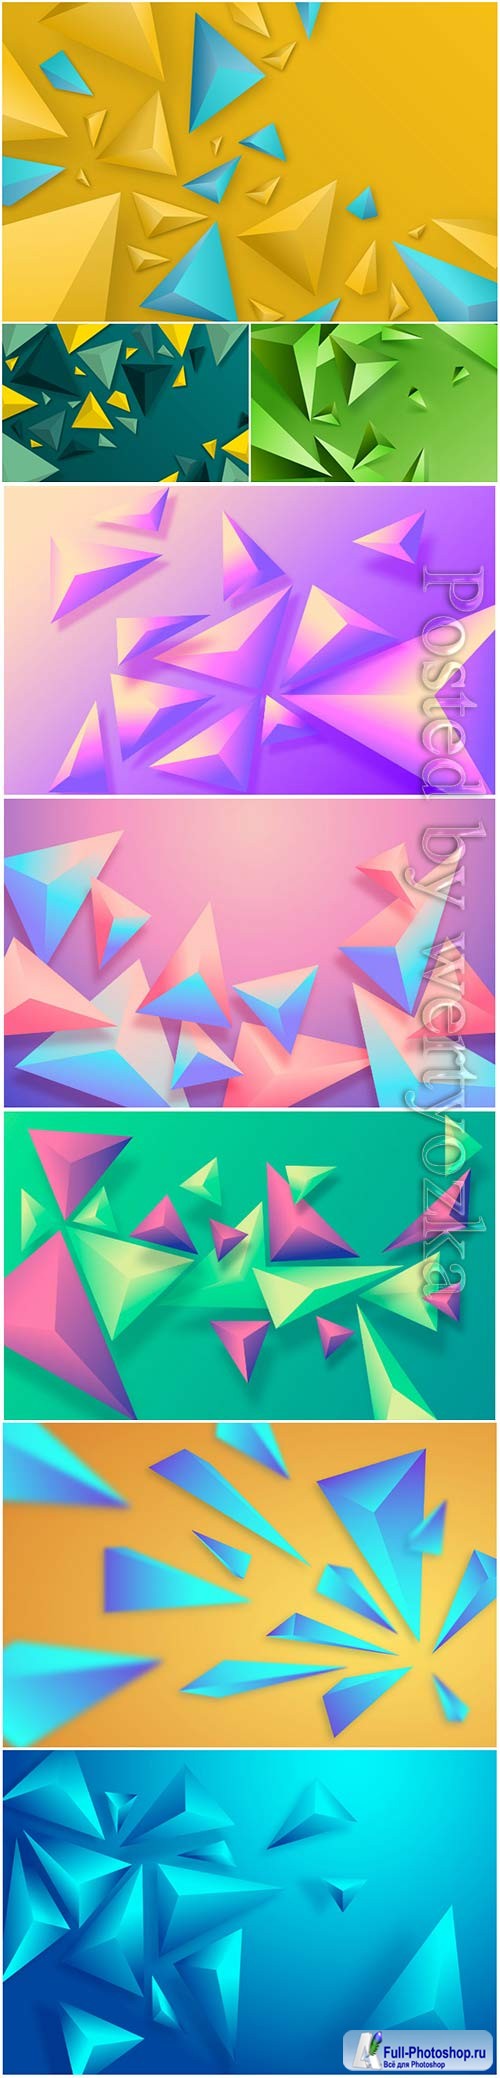 Abstract vector background, 3d models template # 3